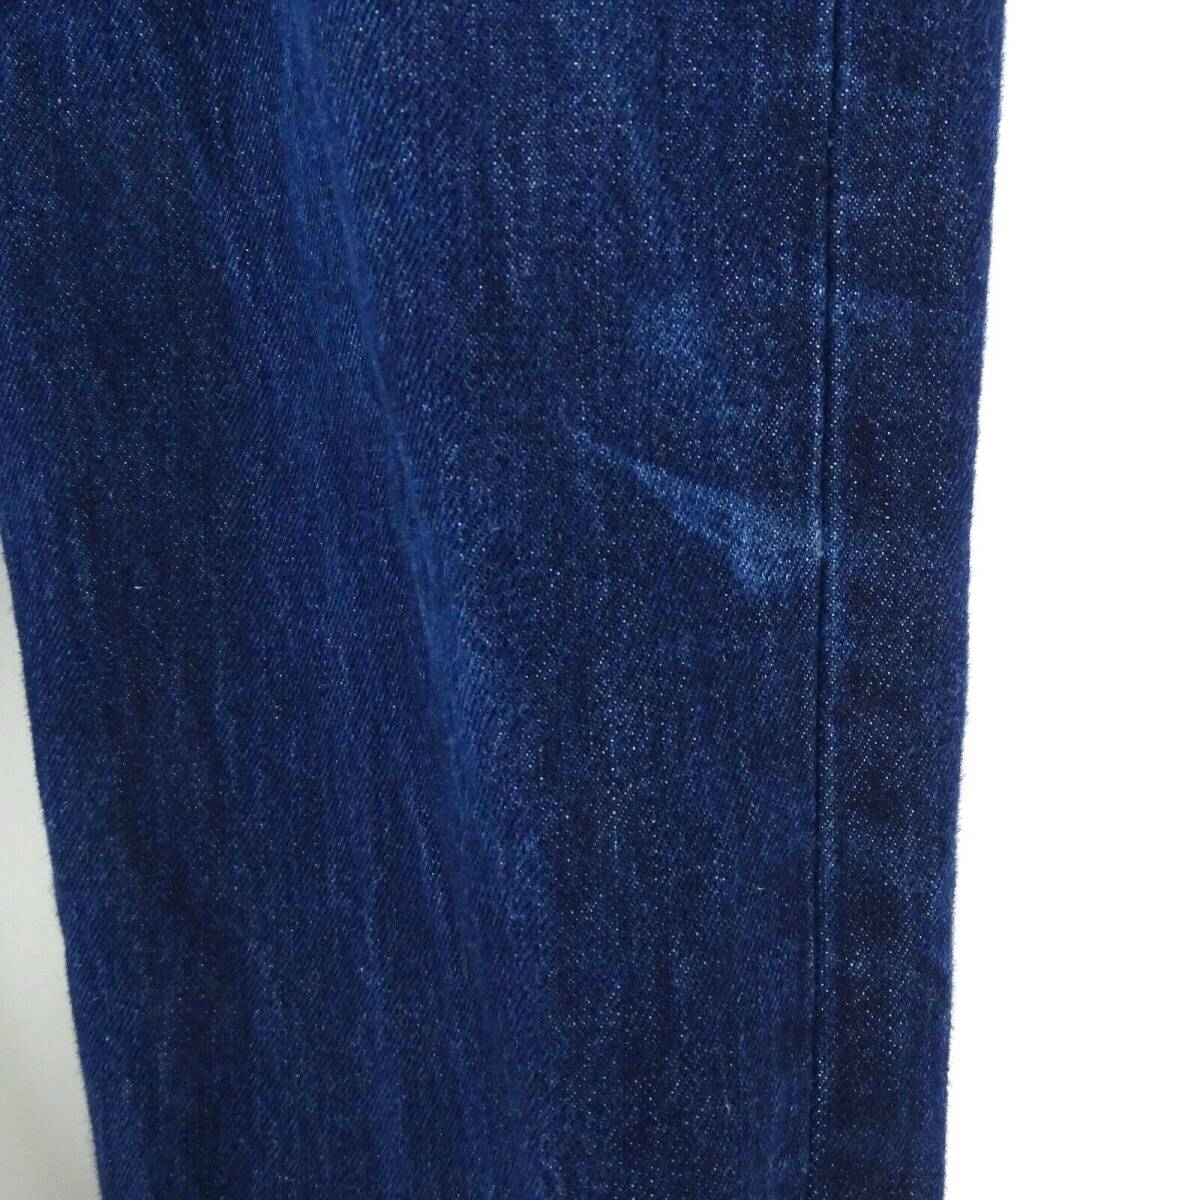 Levis 501 Straight Leg Button Fly All Cotton Jeans Mens W34 x L31.5 Measured 海外 即決_Levis 501 Straight 4